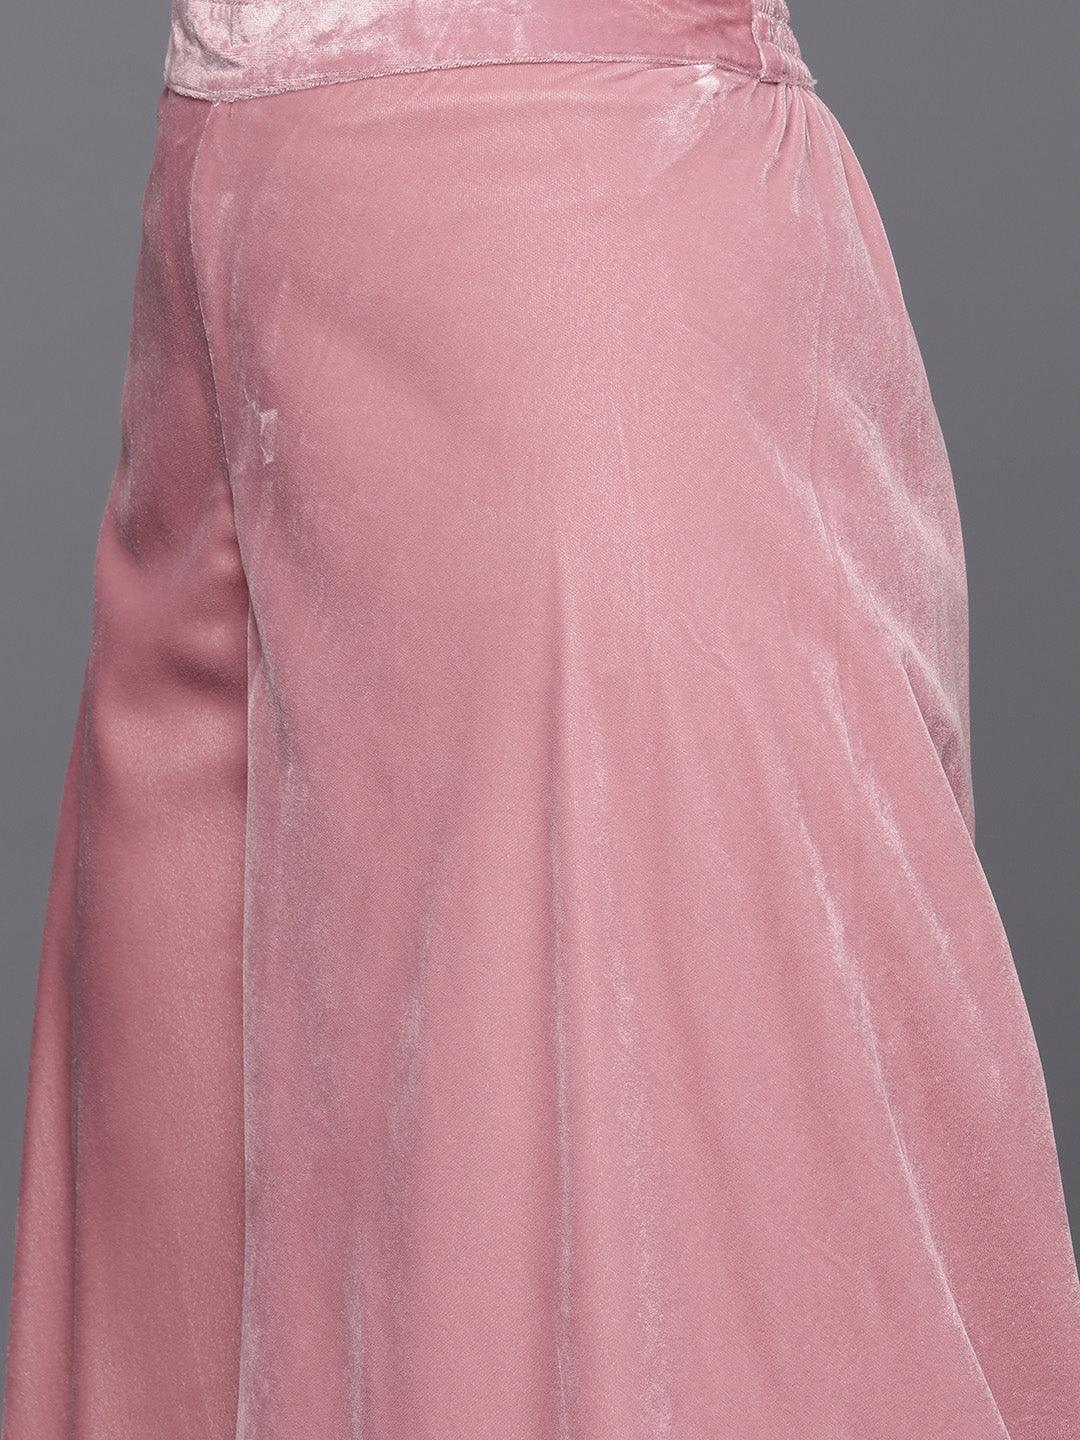 Pink Embellished Polyester Top With Palazzos & Dupatta - Libas